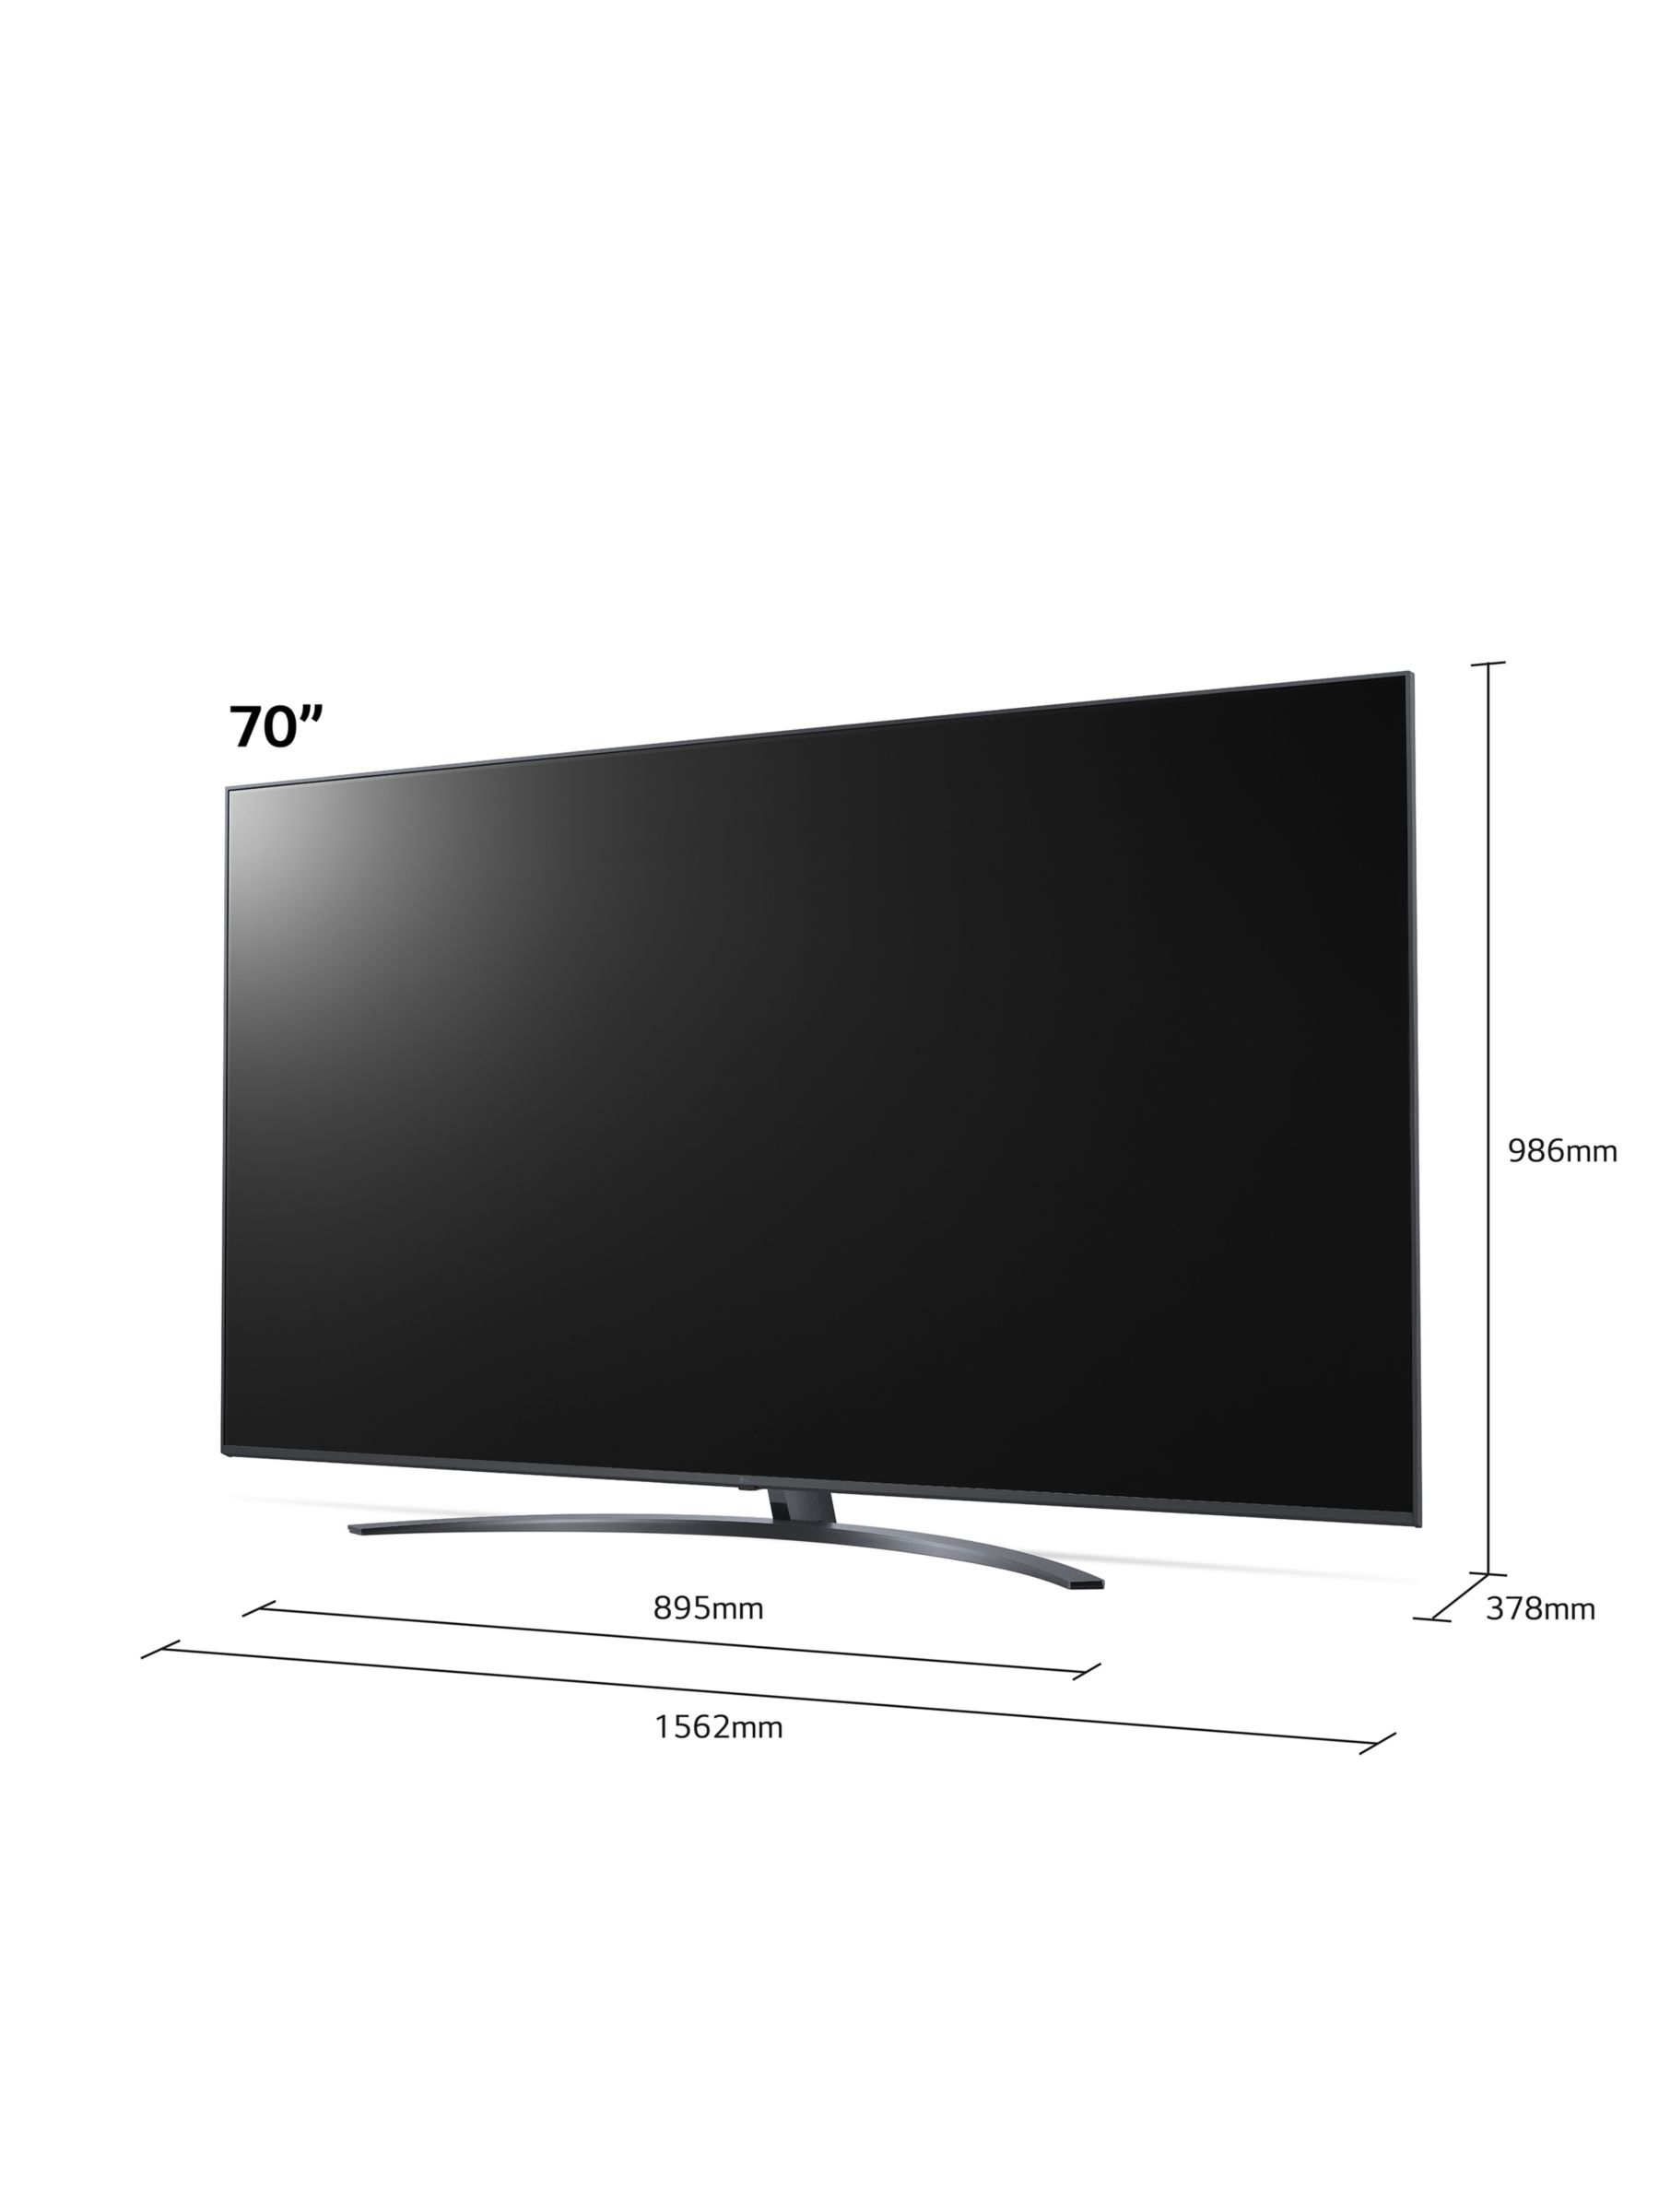 LG 70UP81006LR (2021) LED HDR 4K HD Smart TV, 70 inch with Freeview Play/Freesat